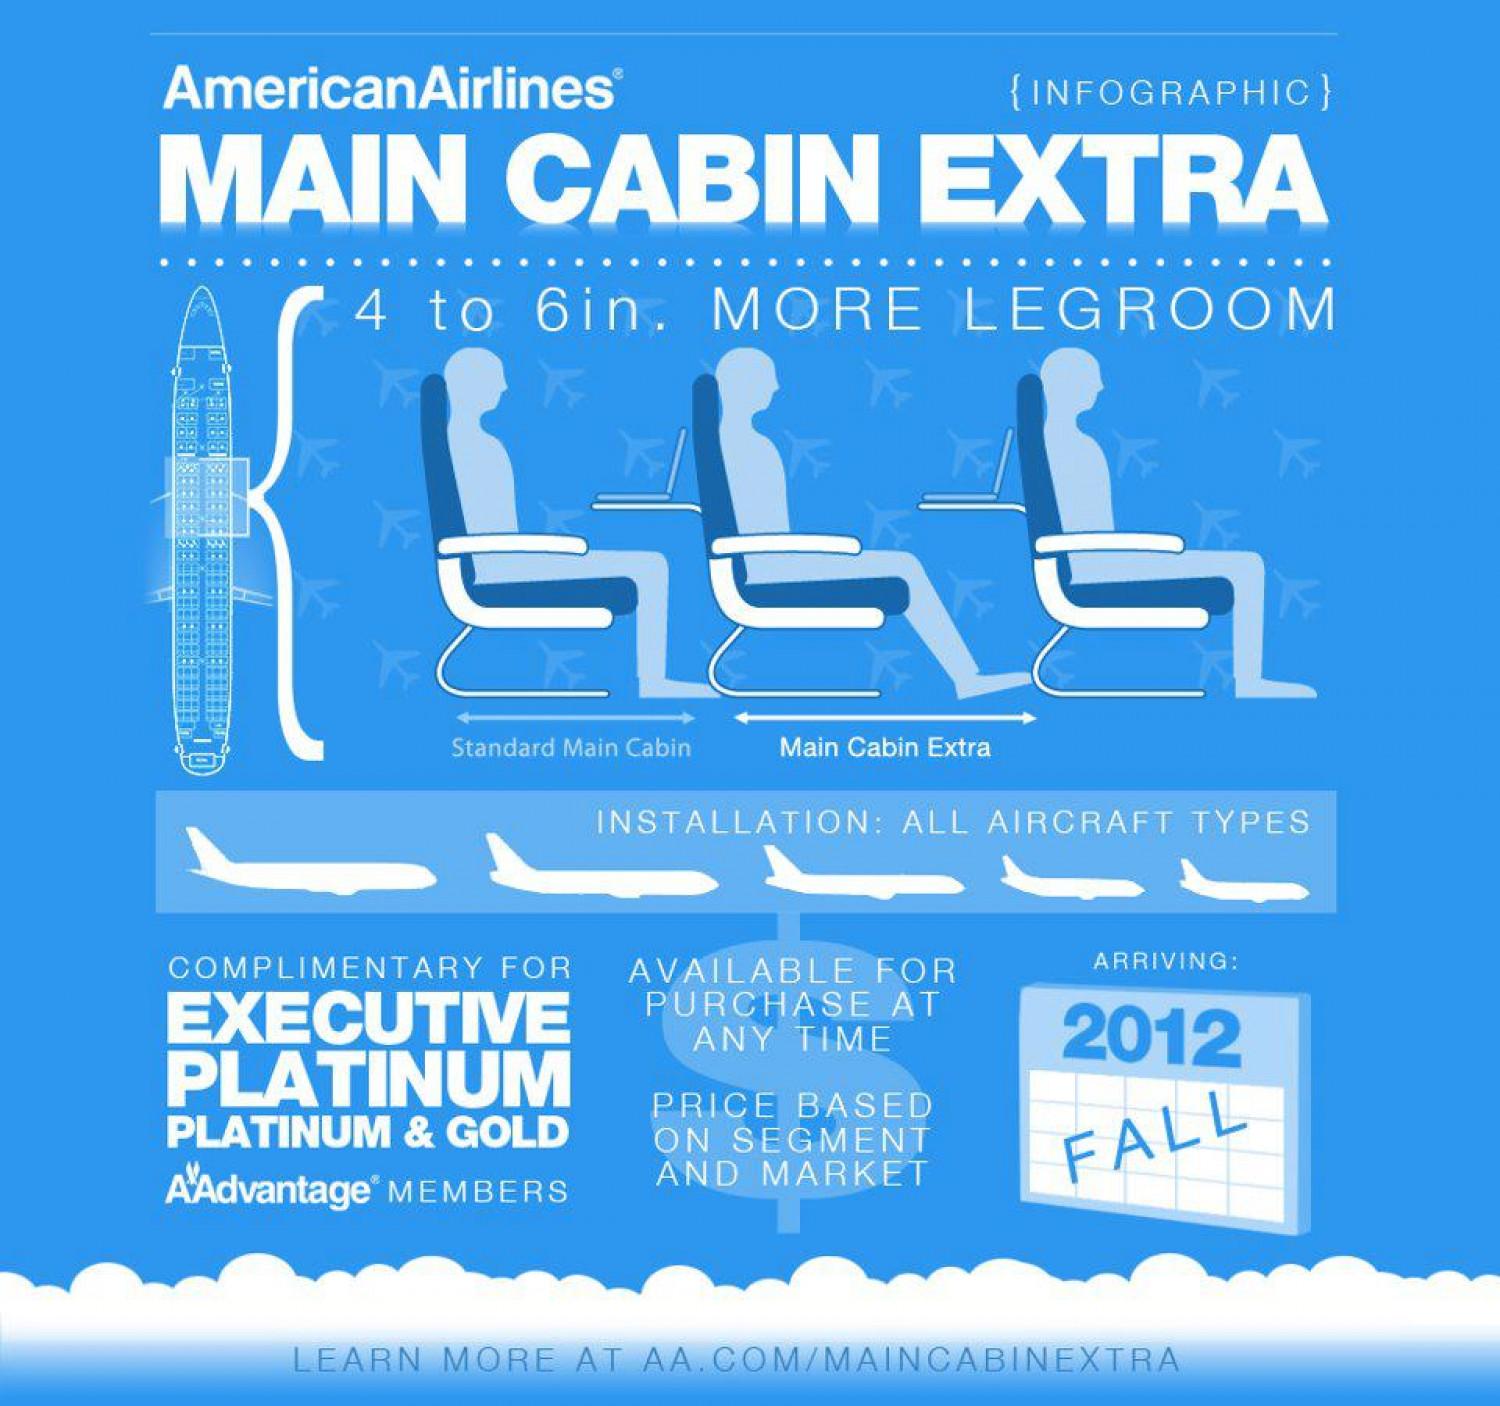 American Airlines' New Main Cabin Extra Seats Infographic